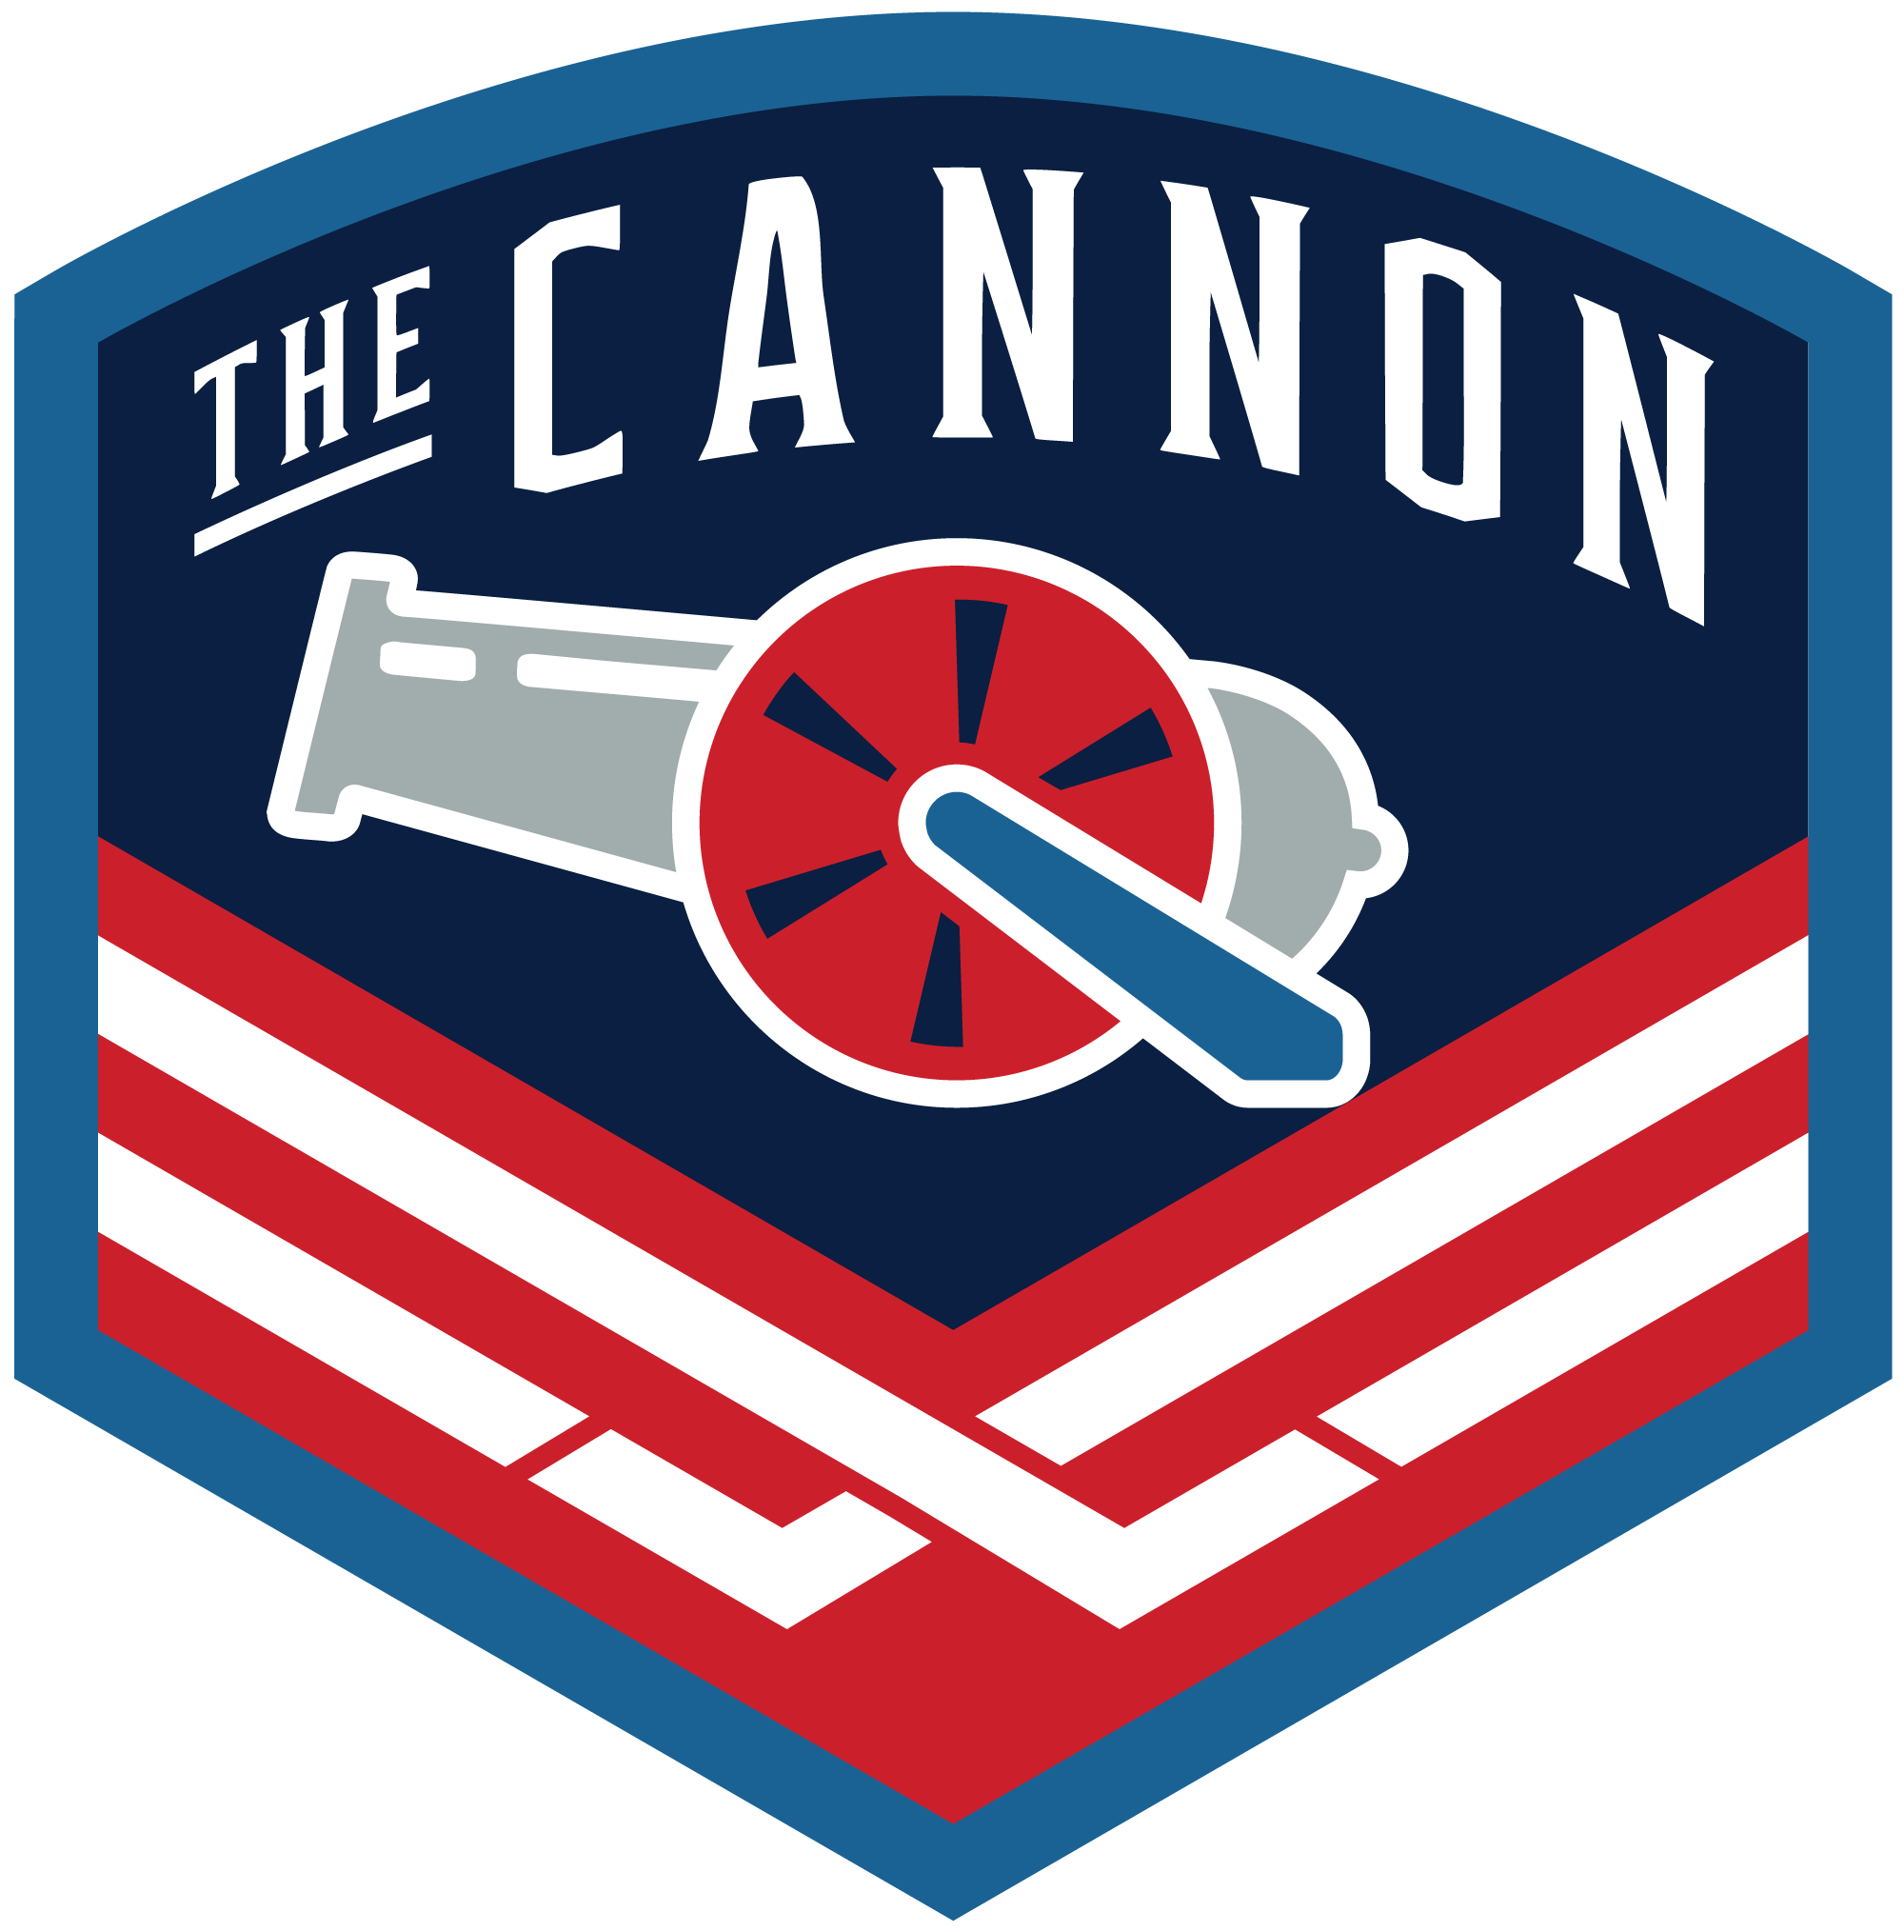 Introducing: a new look for this new era of The Cannon - The Cannon